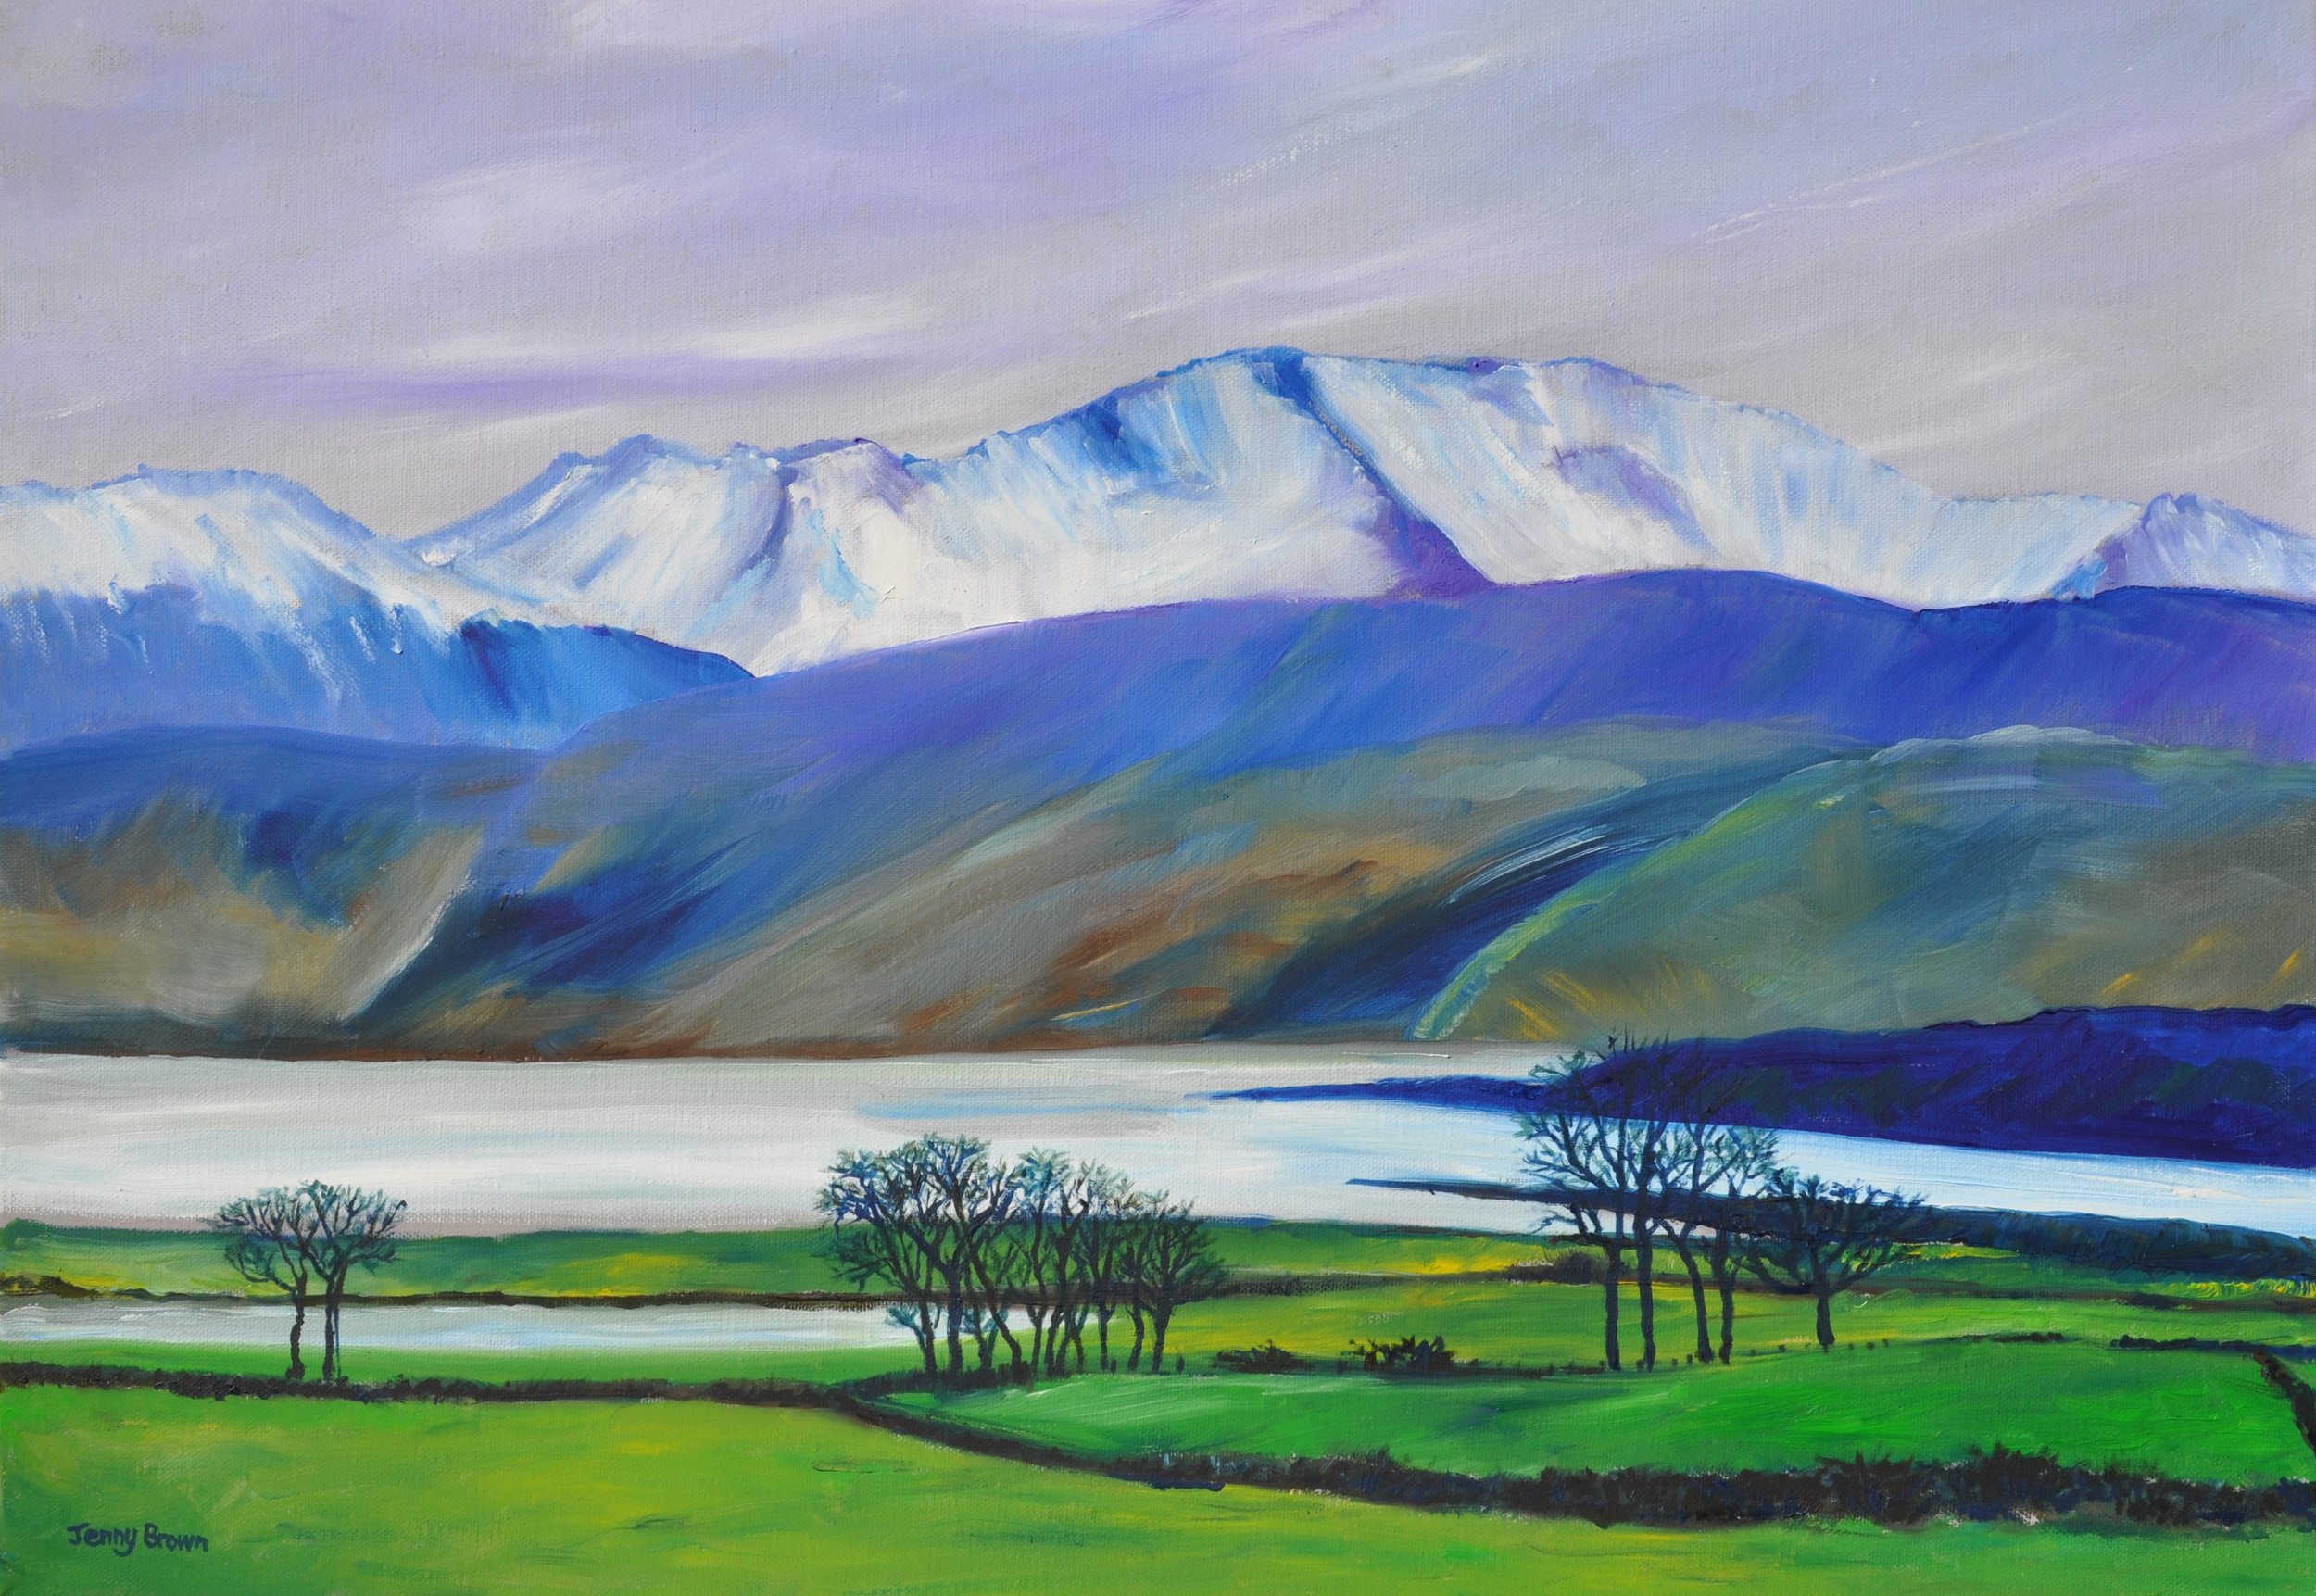 Snow-capped Arran from Ballycaul, Bute SOLD